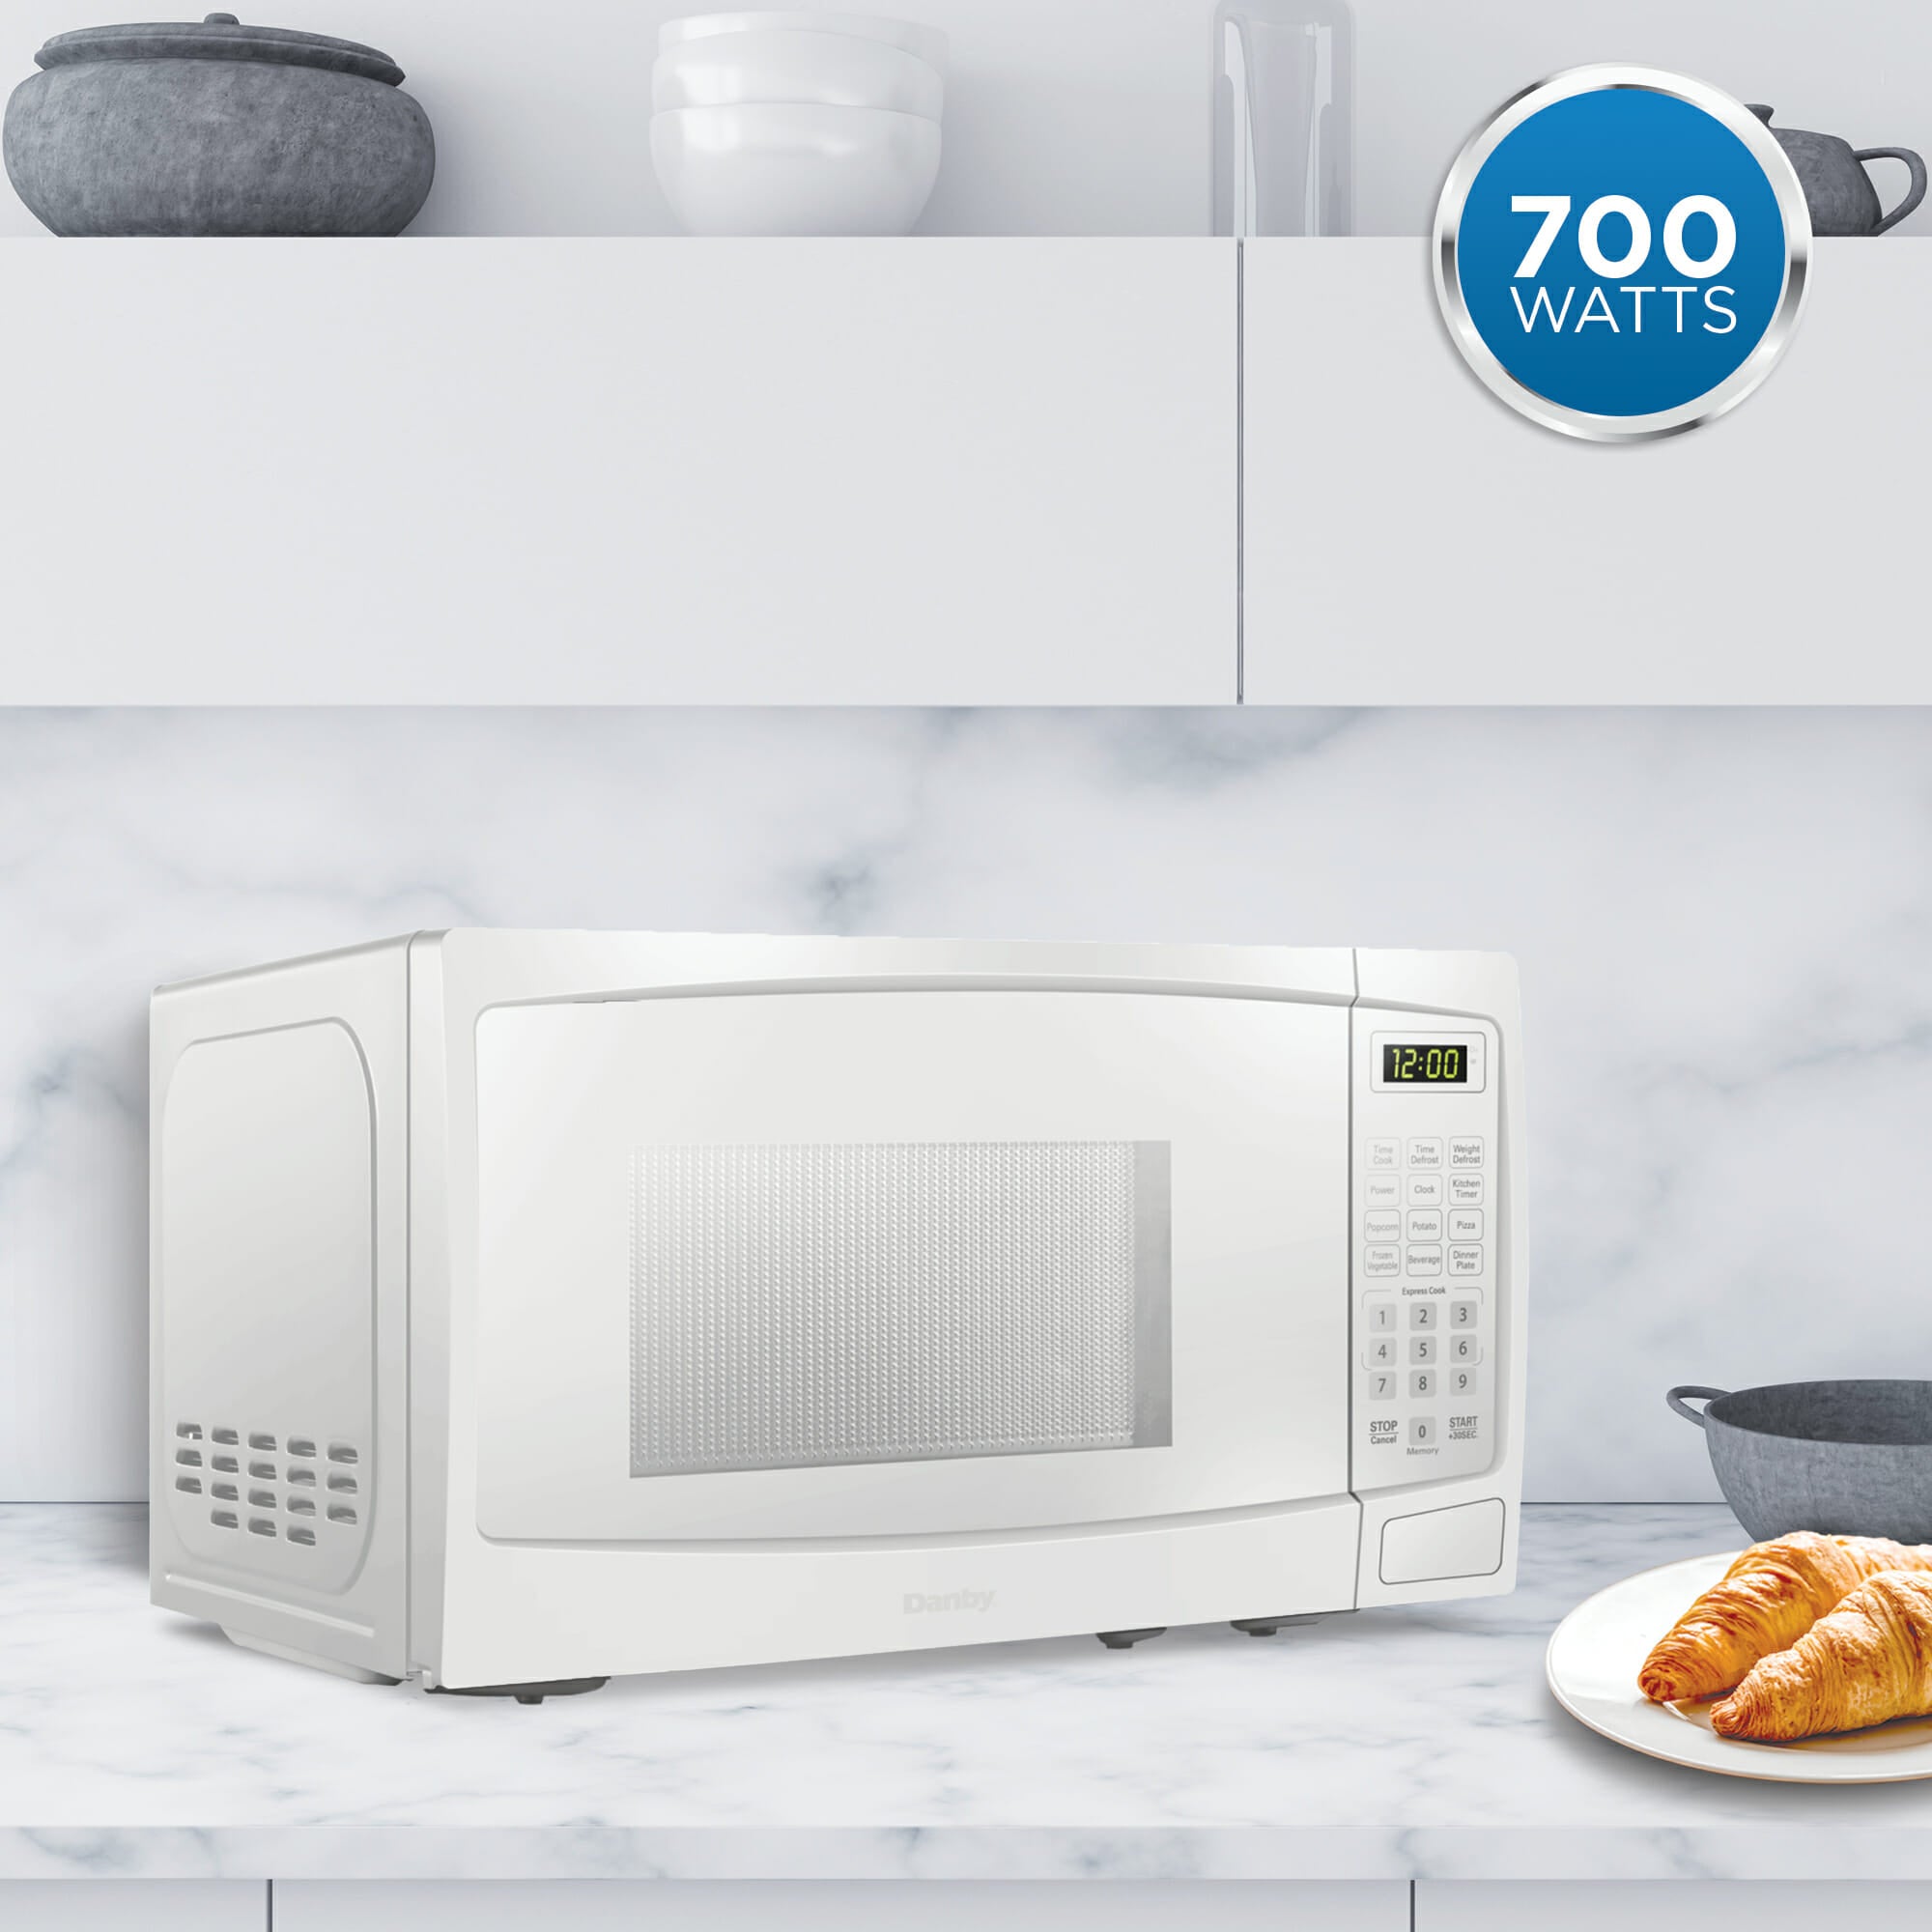 Danby - 0.7 cu. Ft  Counter top Microwave in White - DBMW0920BWW